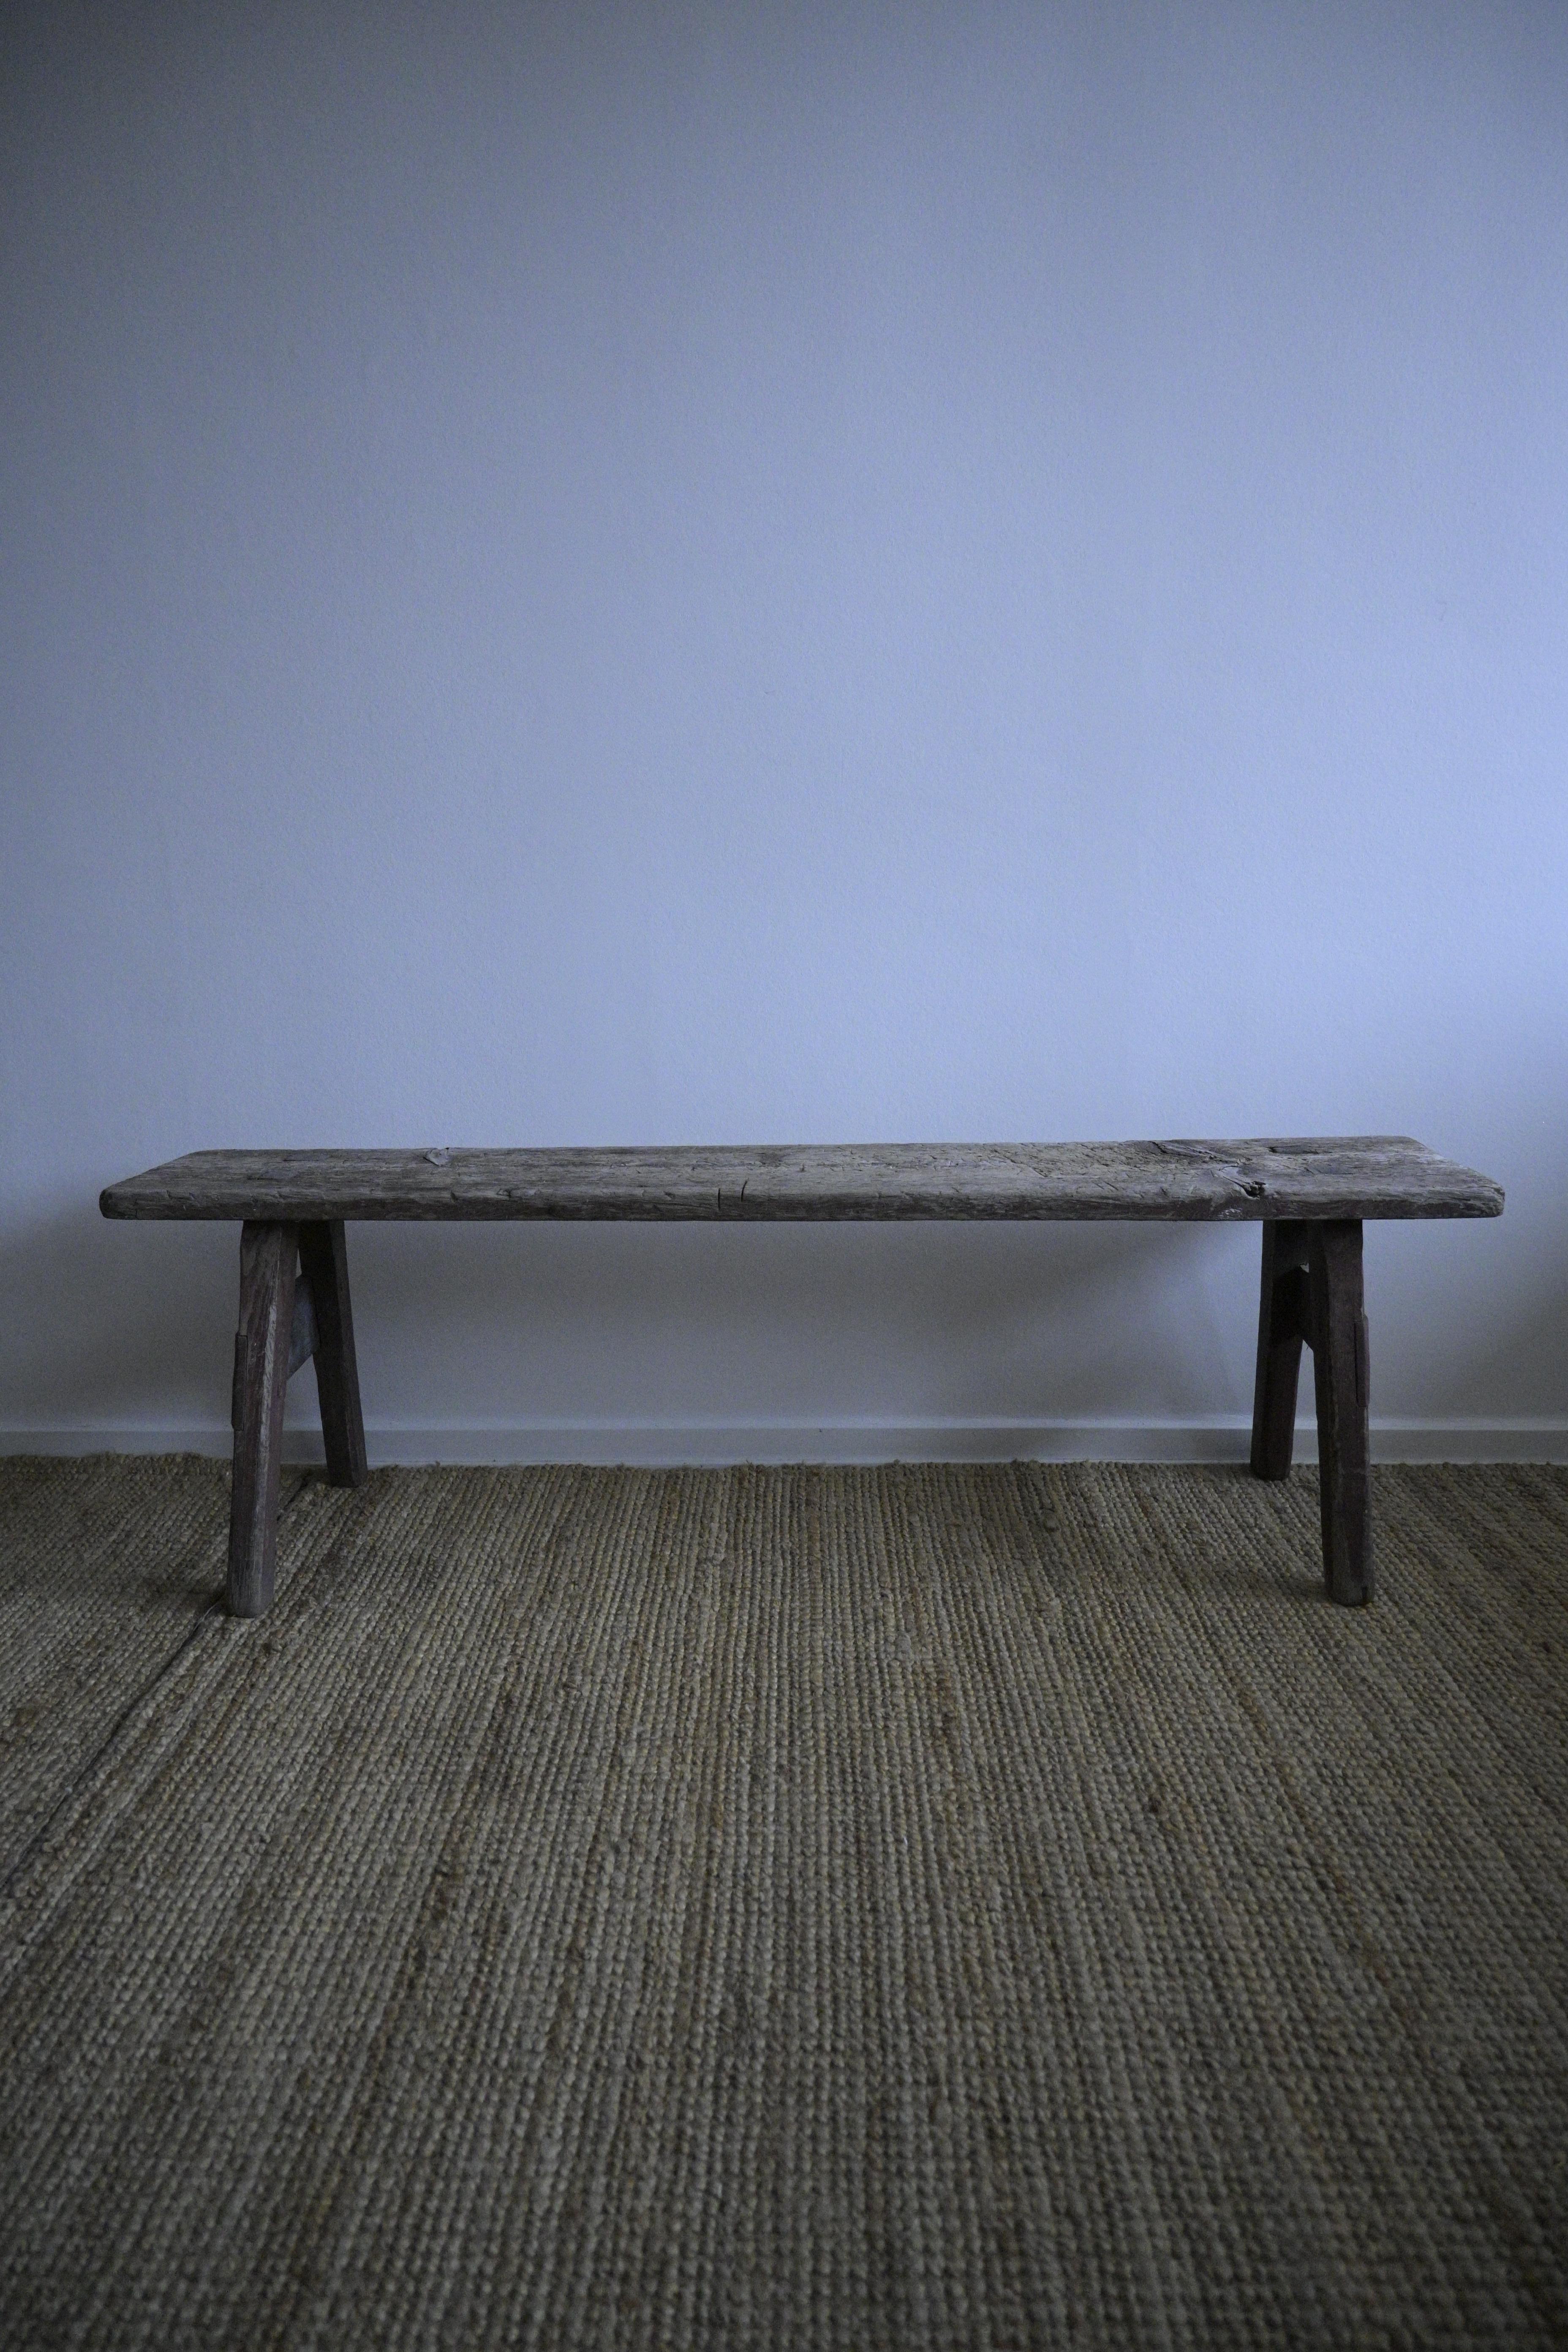 Swedish long Bench 1870c

Made out of pine wood.

Sold in as-is condition.

Height: 42 cm/16.5 inch
Depth: 27 cm/10.6 inch
Widht: 132 cm/51.9 inch